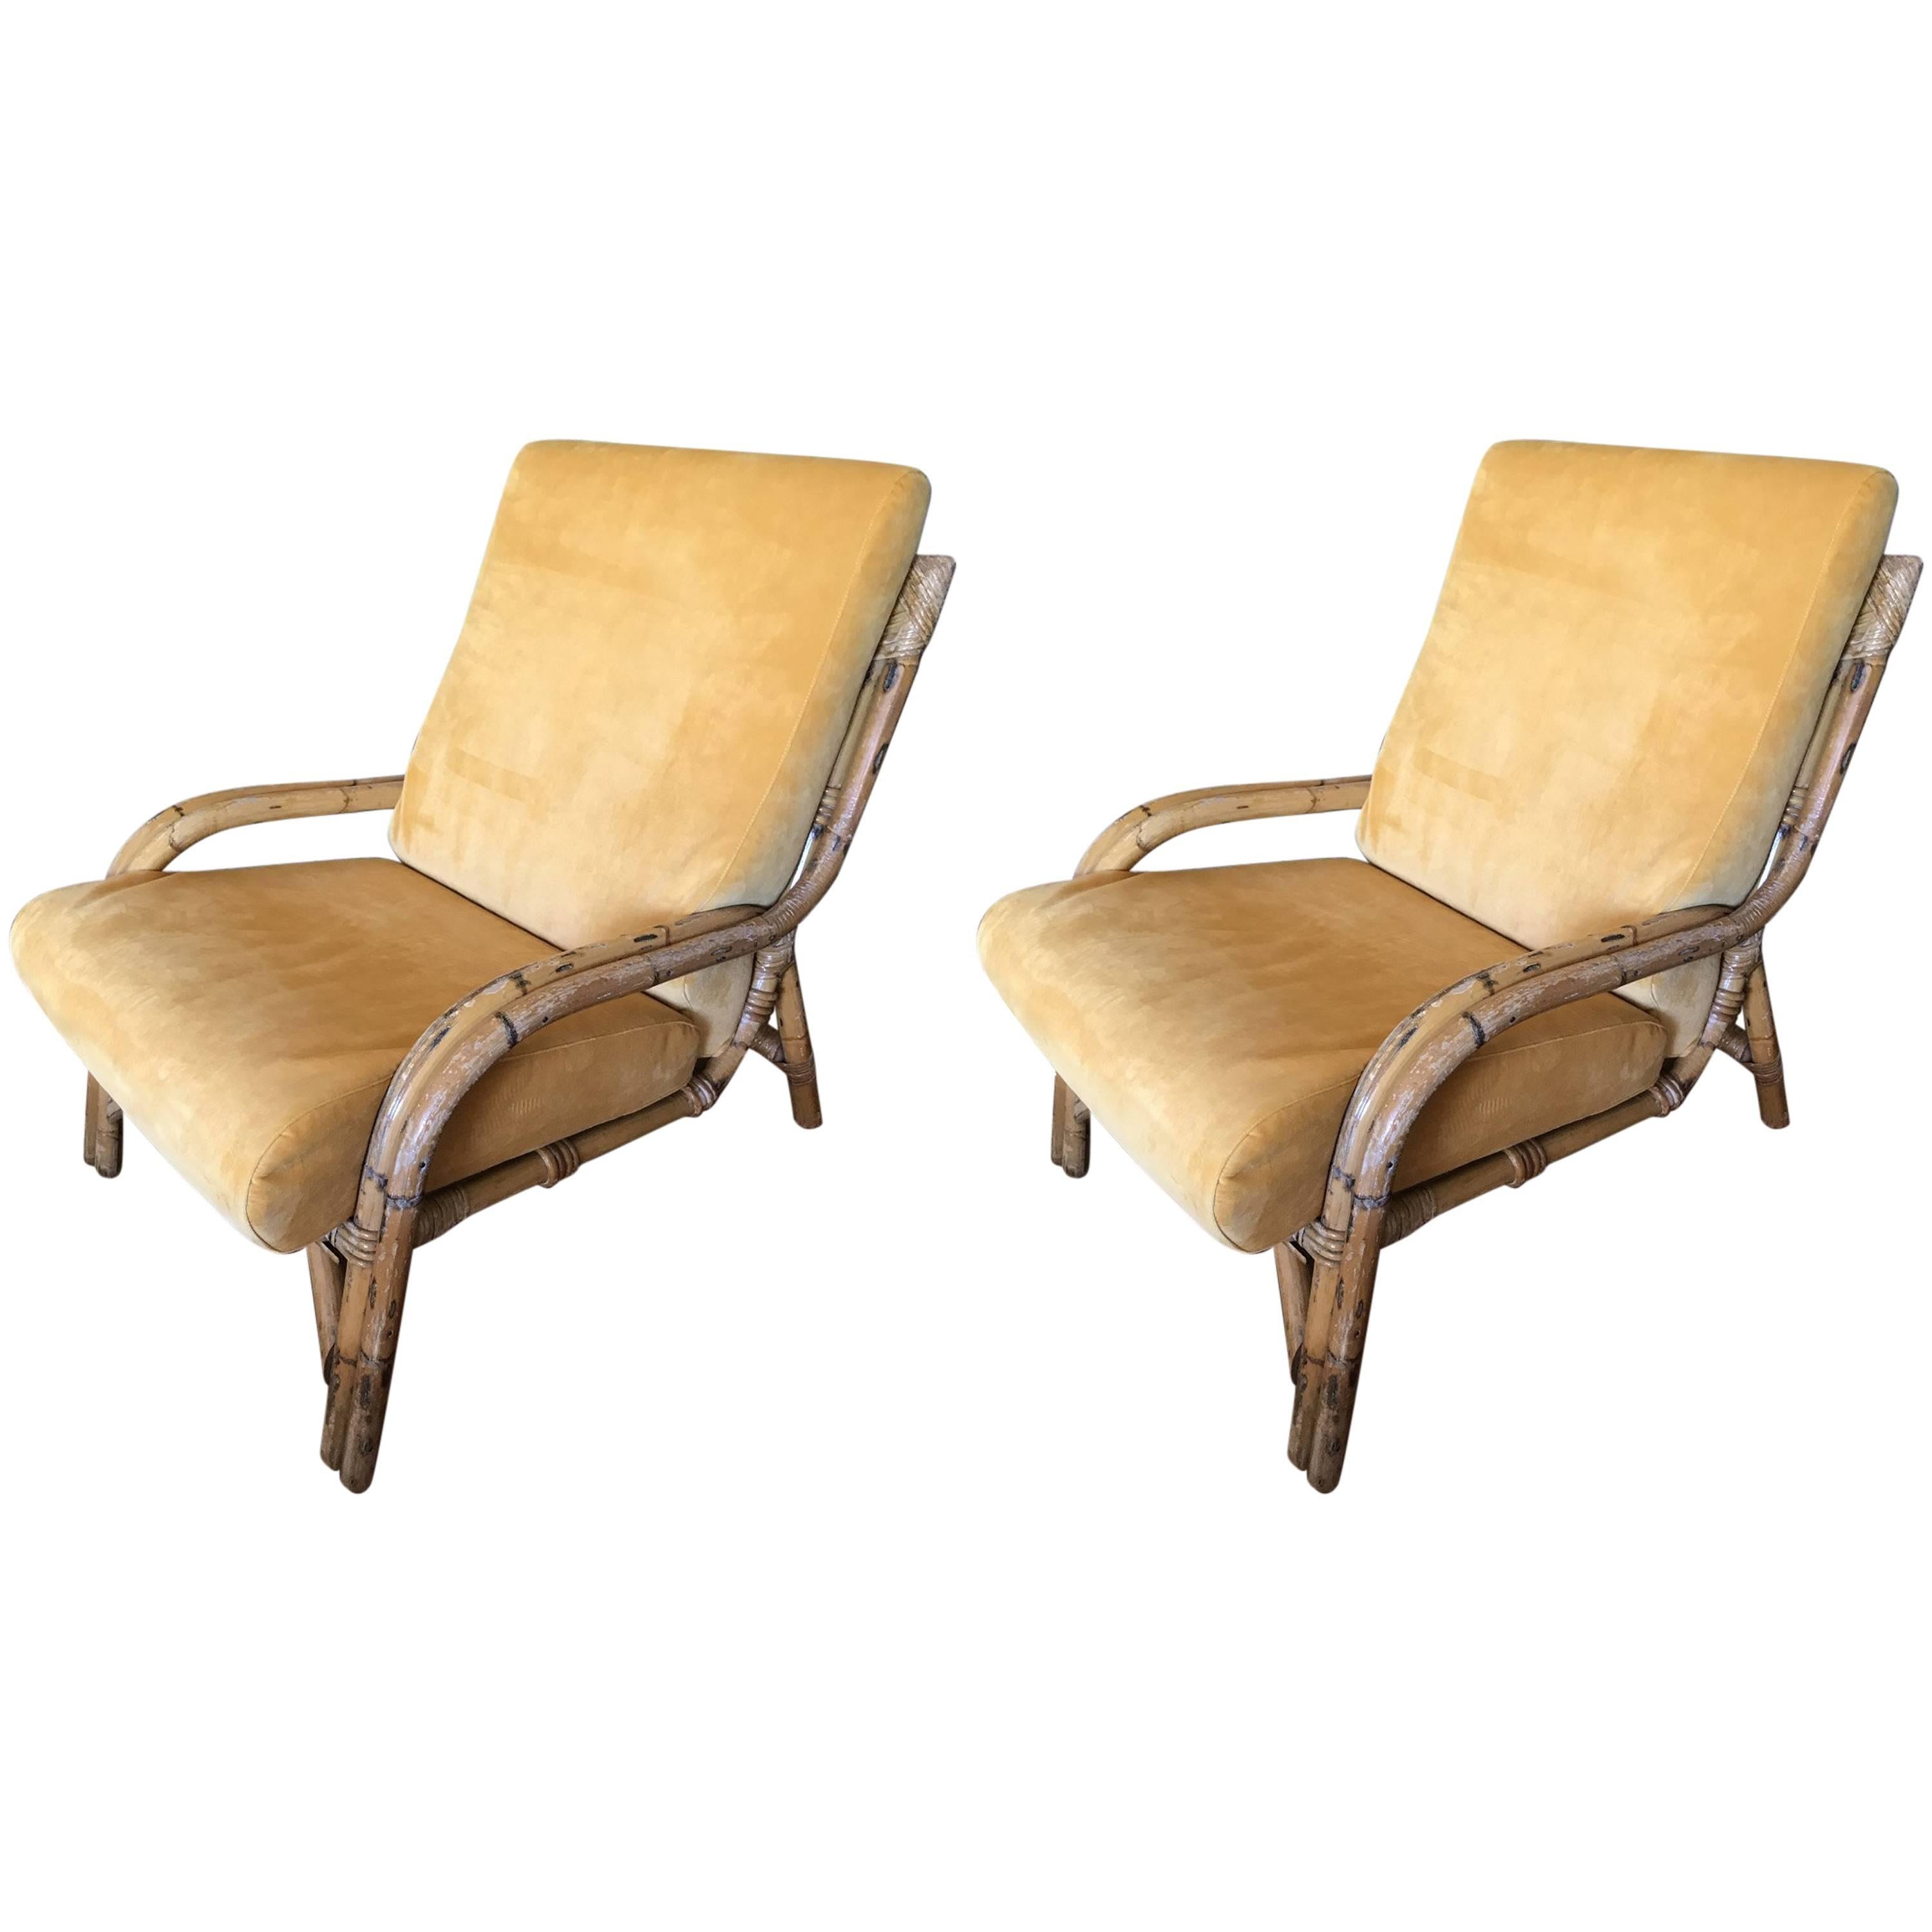 Pair of French Audoux Minet Wicker Armchairs, circa 1960